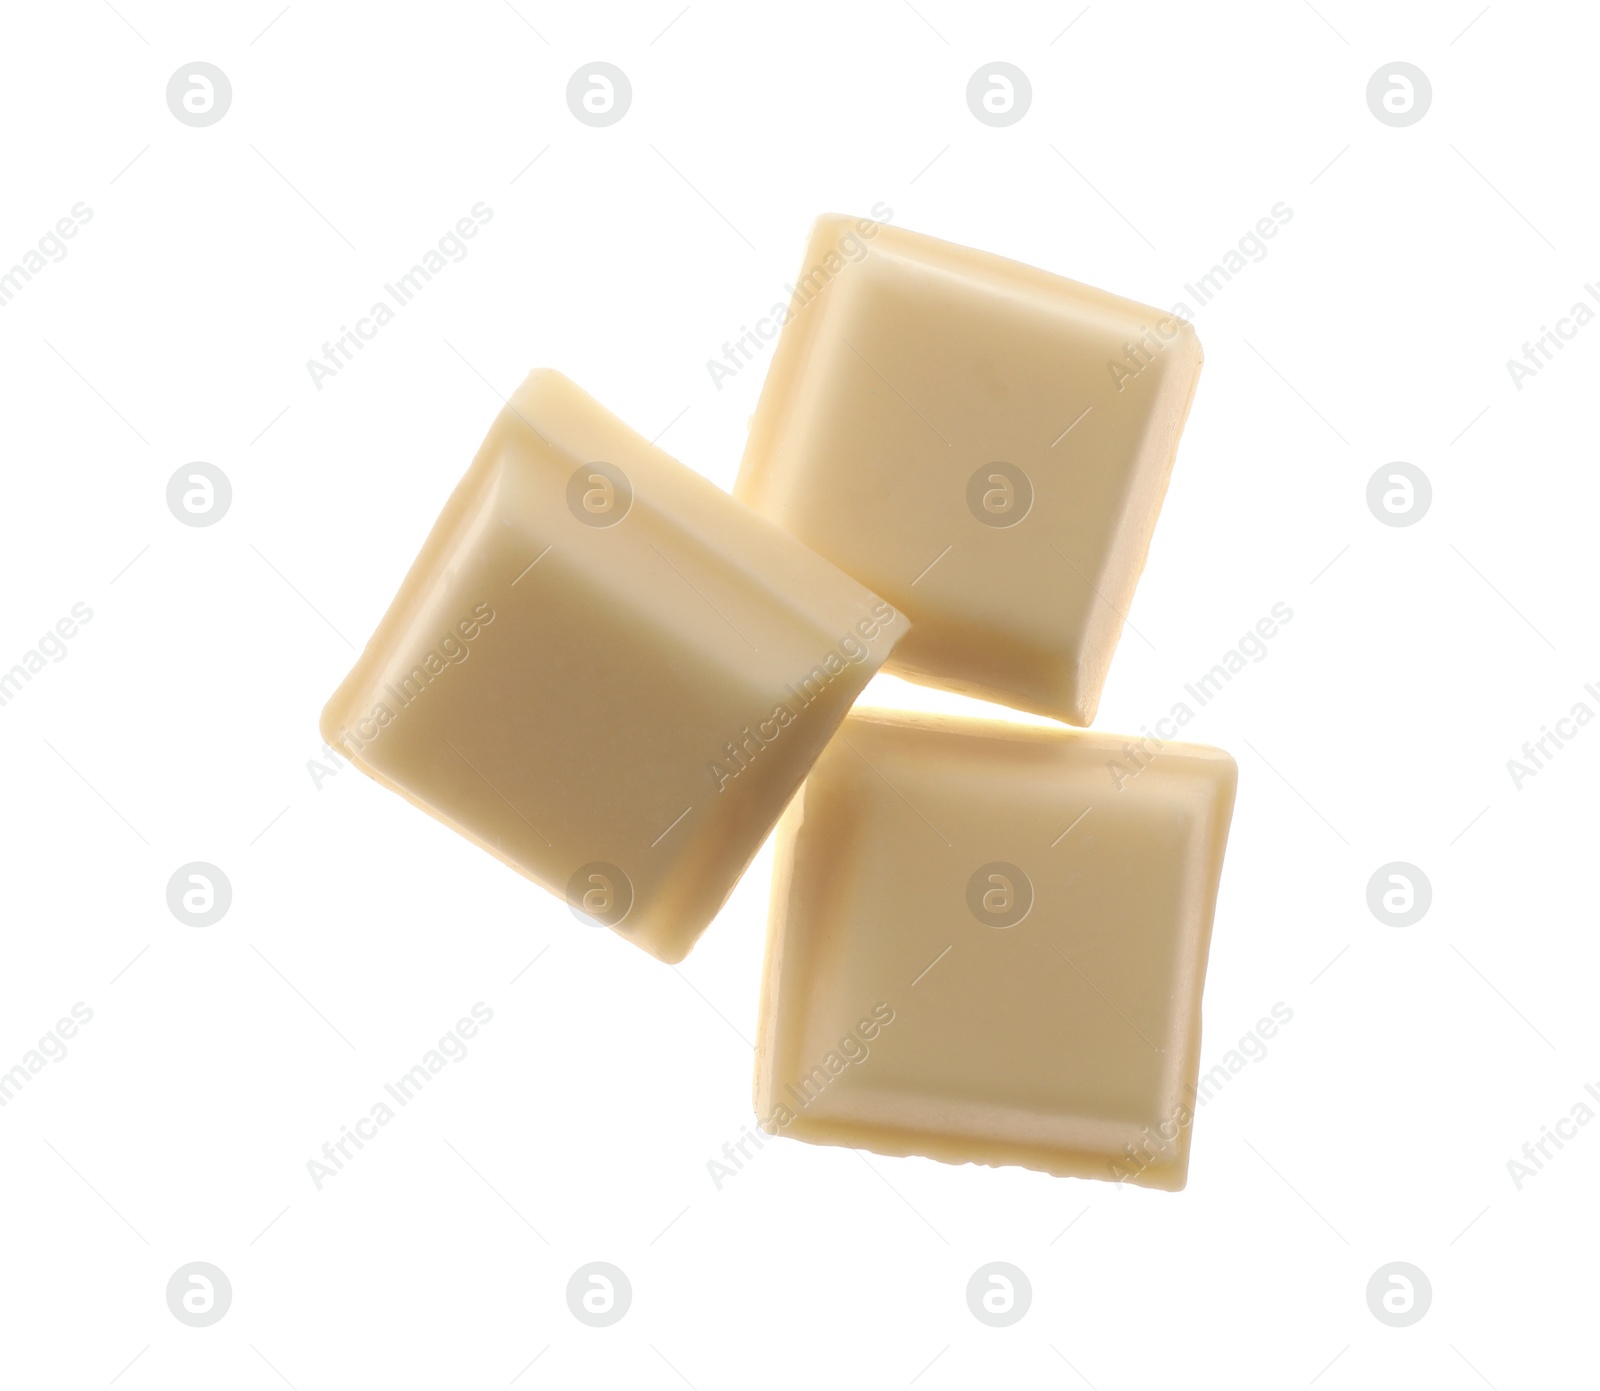 Photo of Pieces of tasty sweet chocolate isolated on white